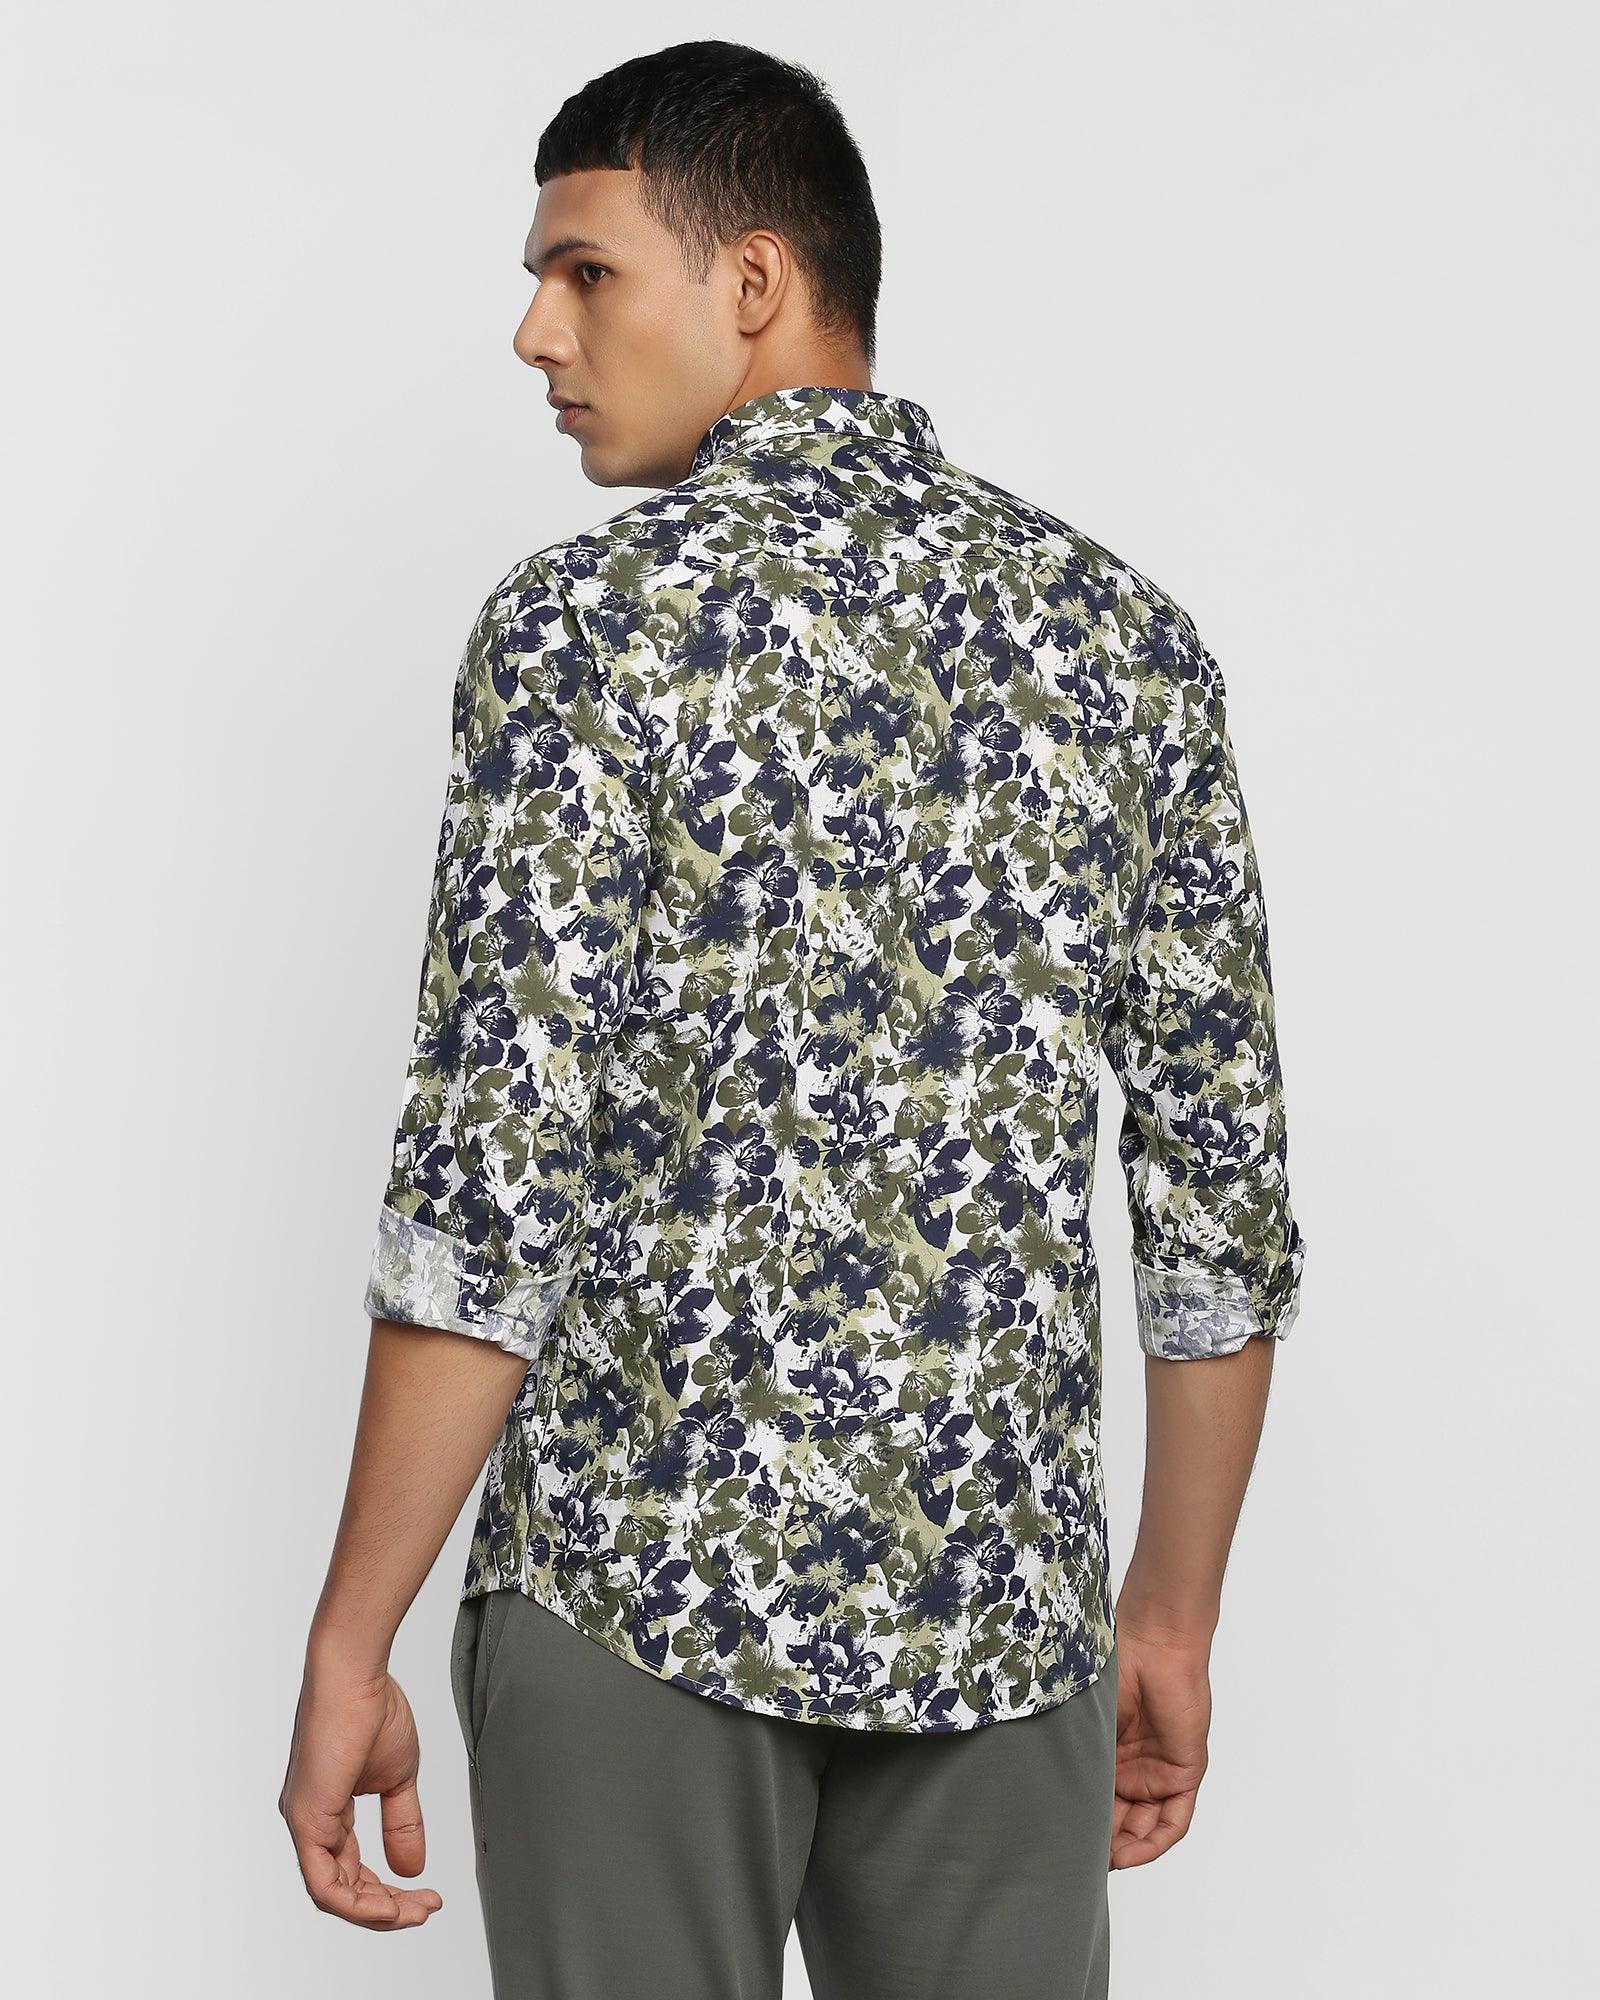 Casual Olive Printed Shirt - Deck